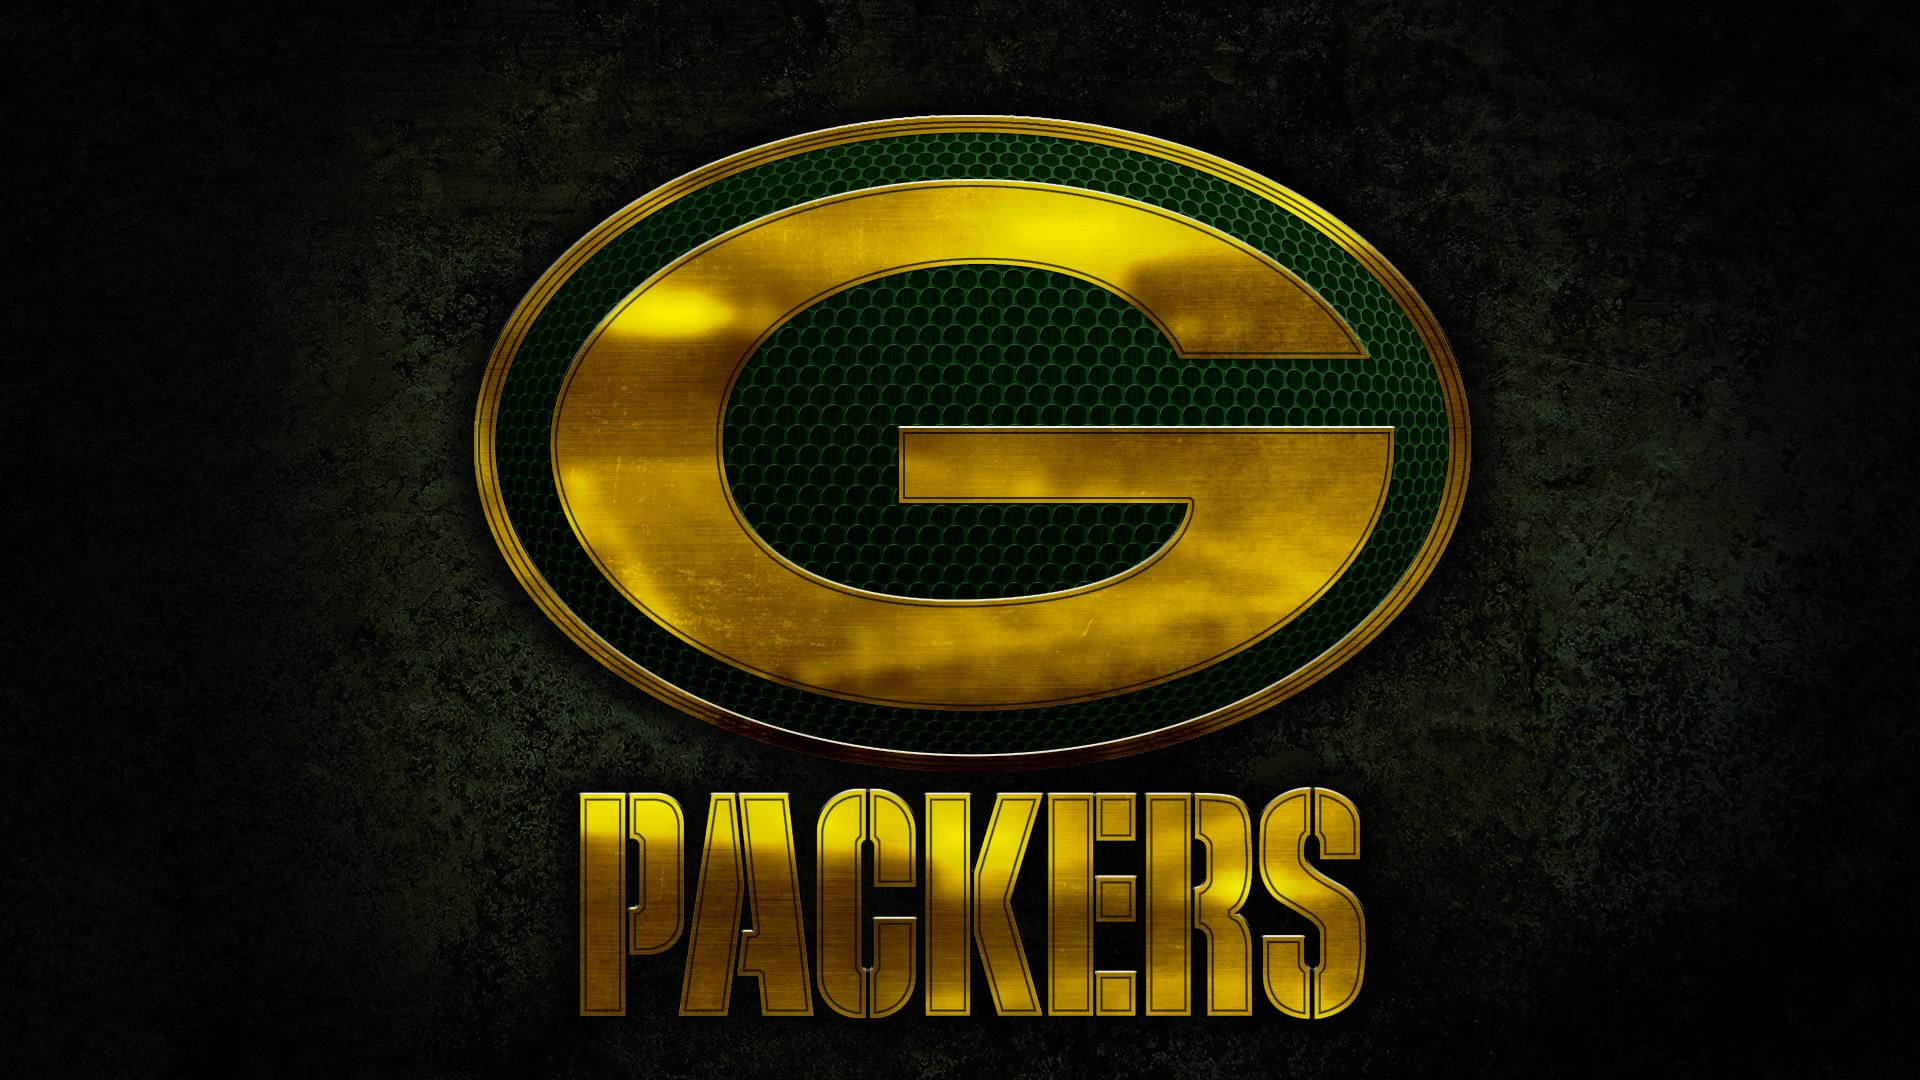 What are your Packers wallpapers GreenBayPackers